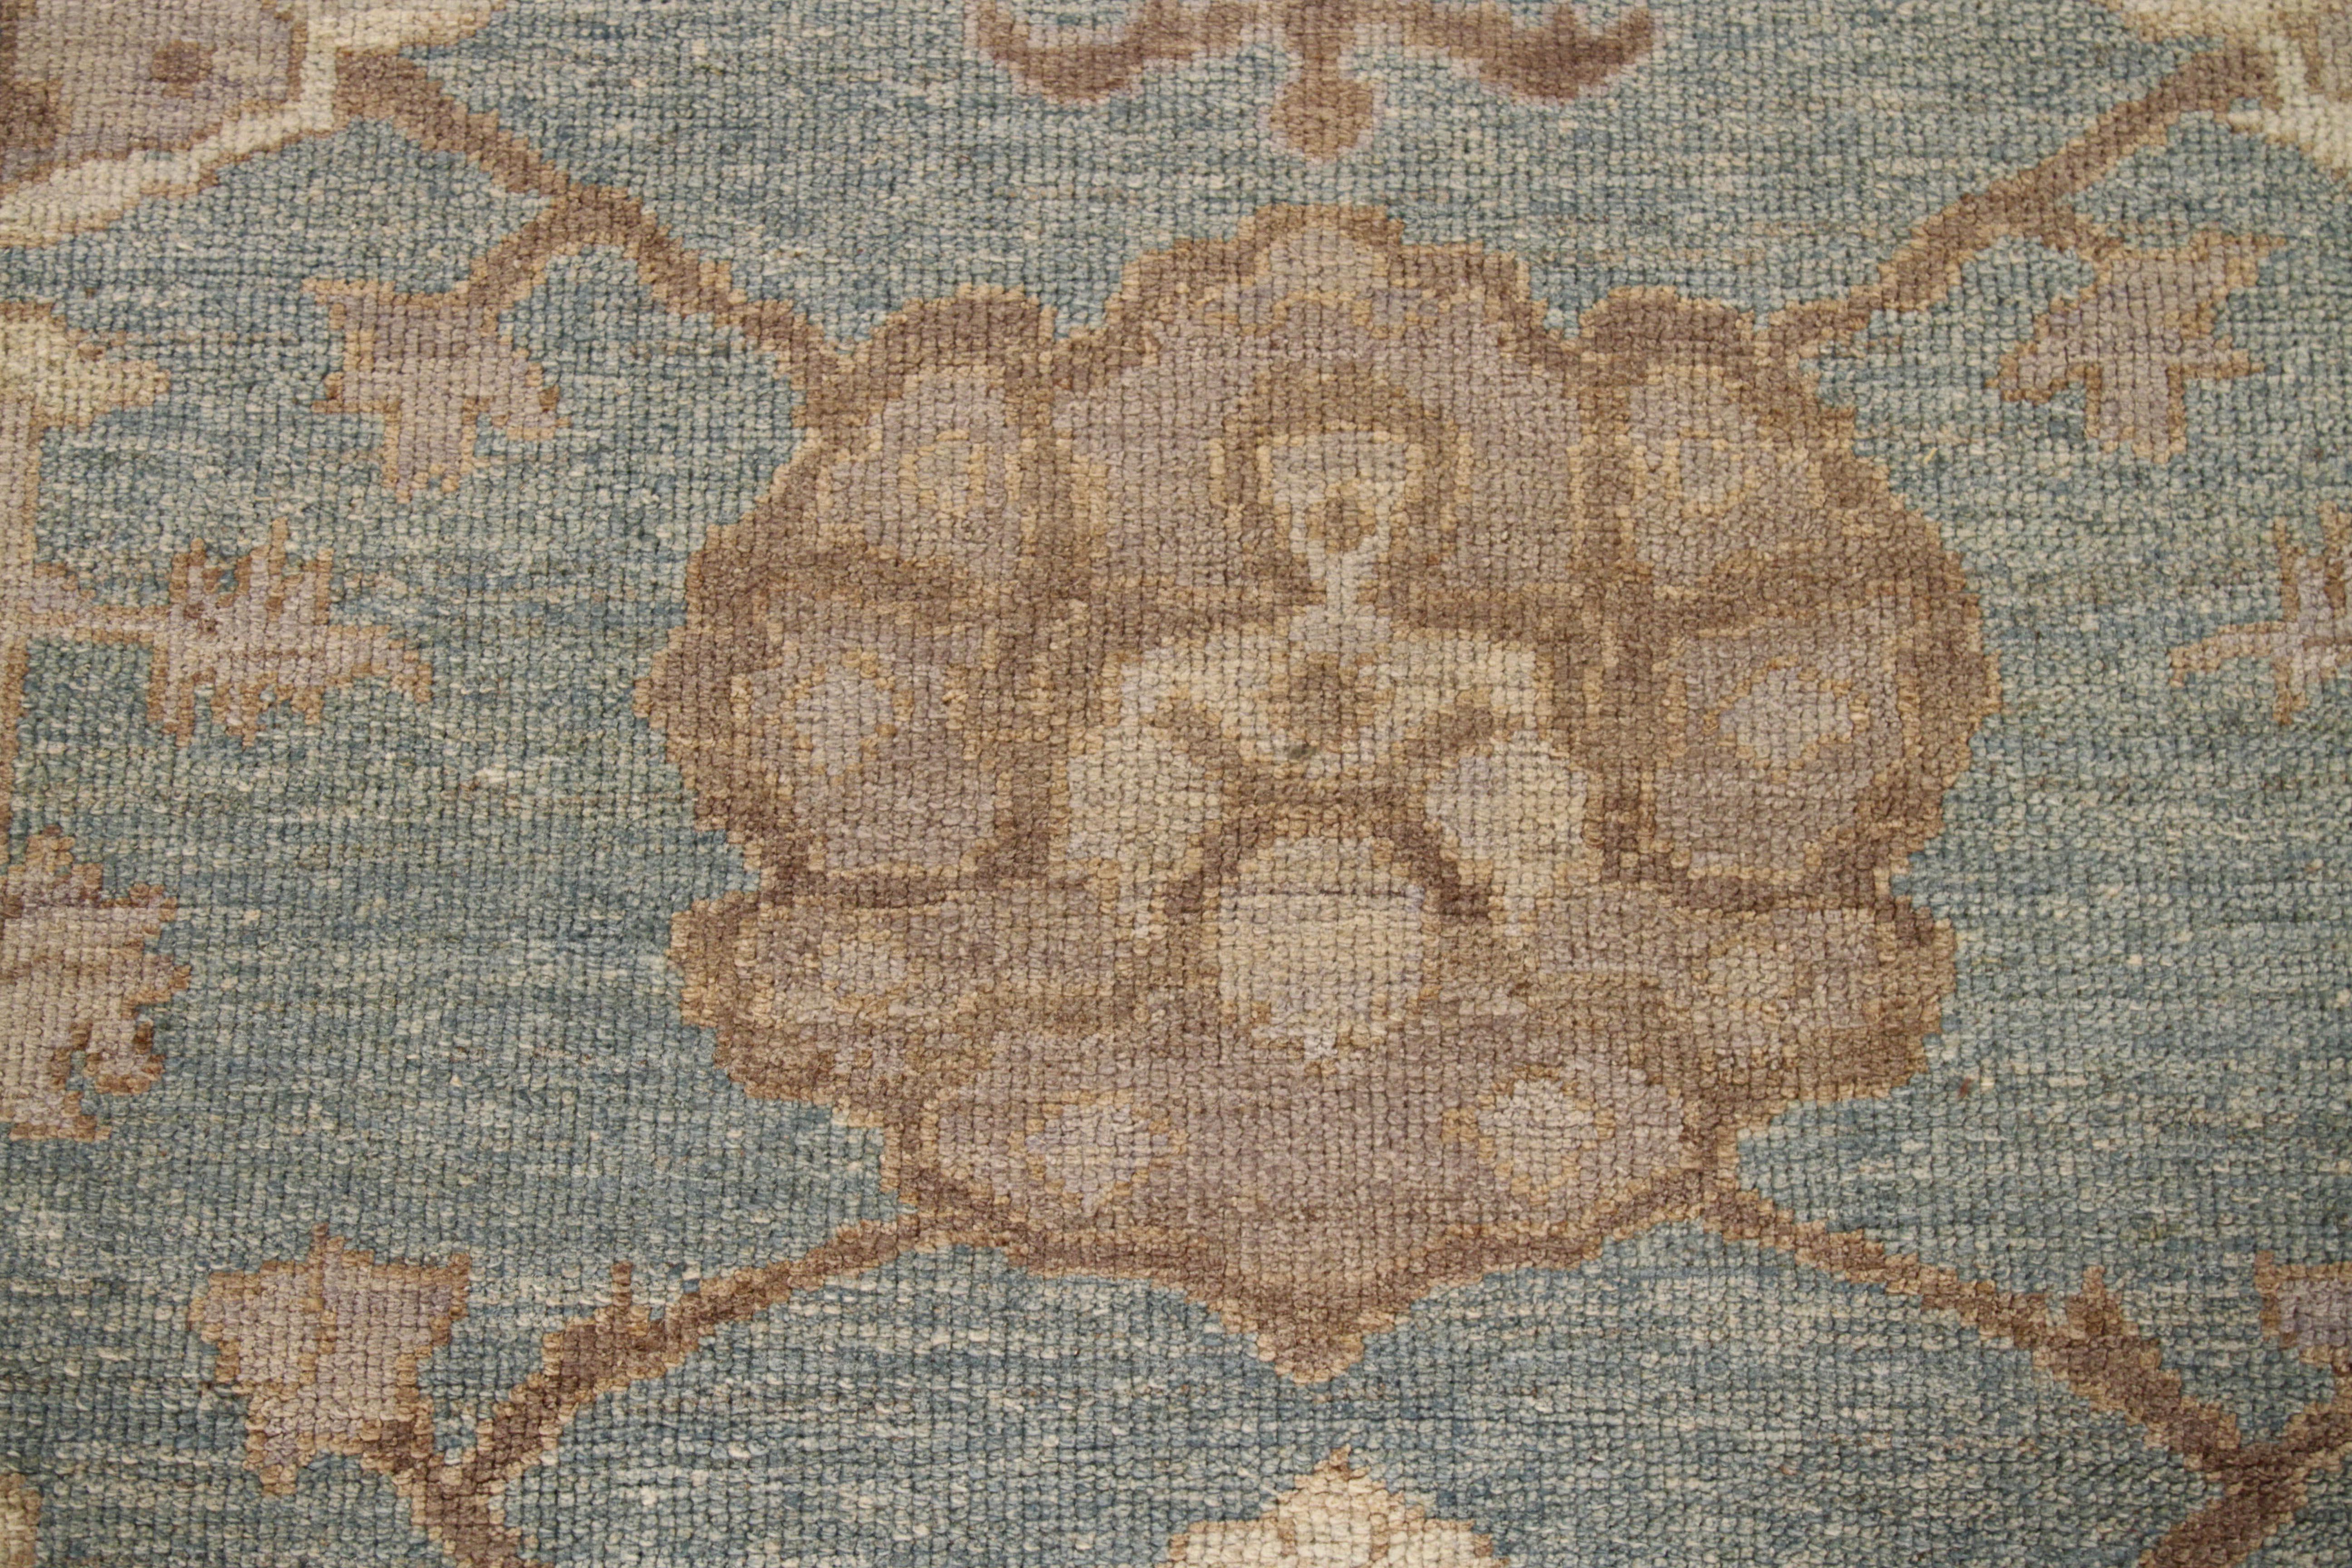 Hand-Knotted Contemporary Oushak Persian Rug in Blue with Brown and Beige Flower Motif